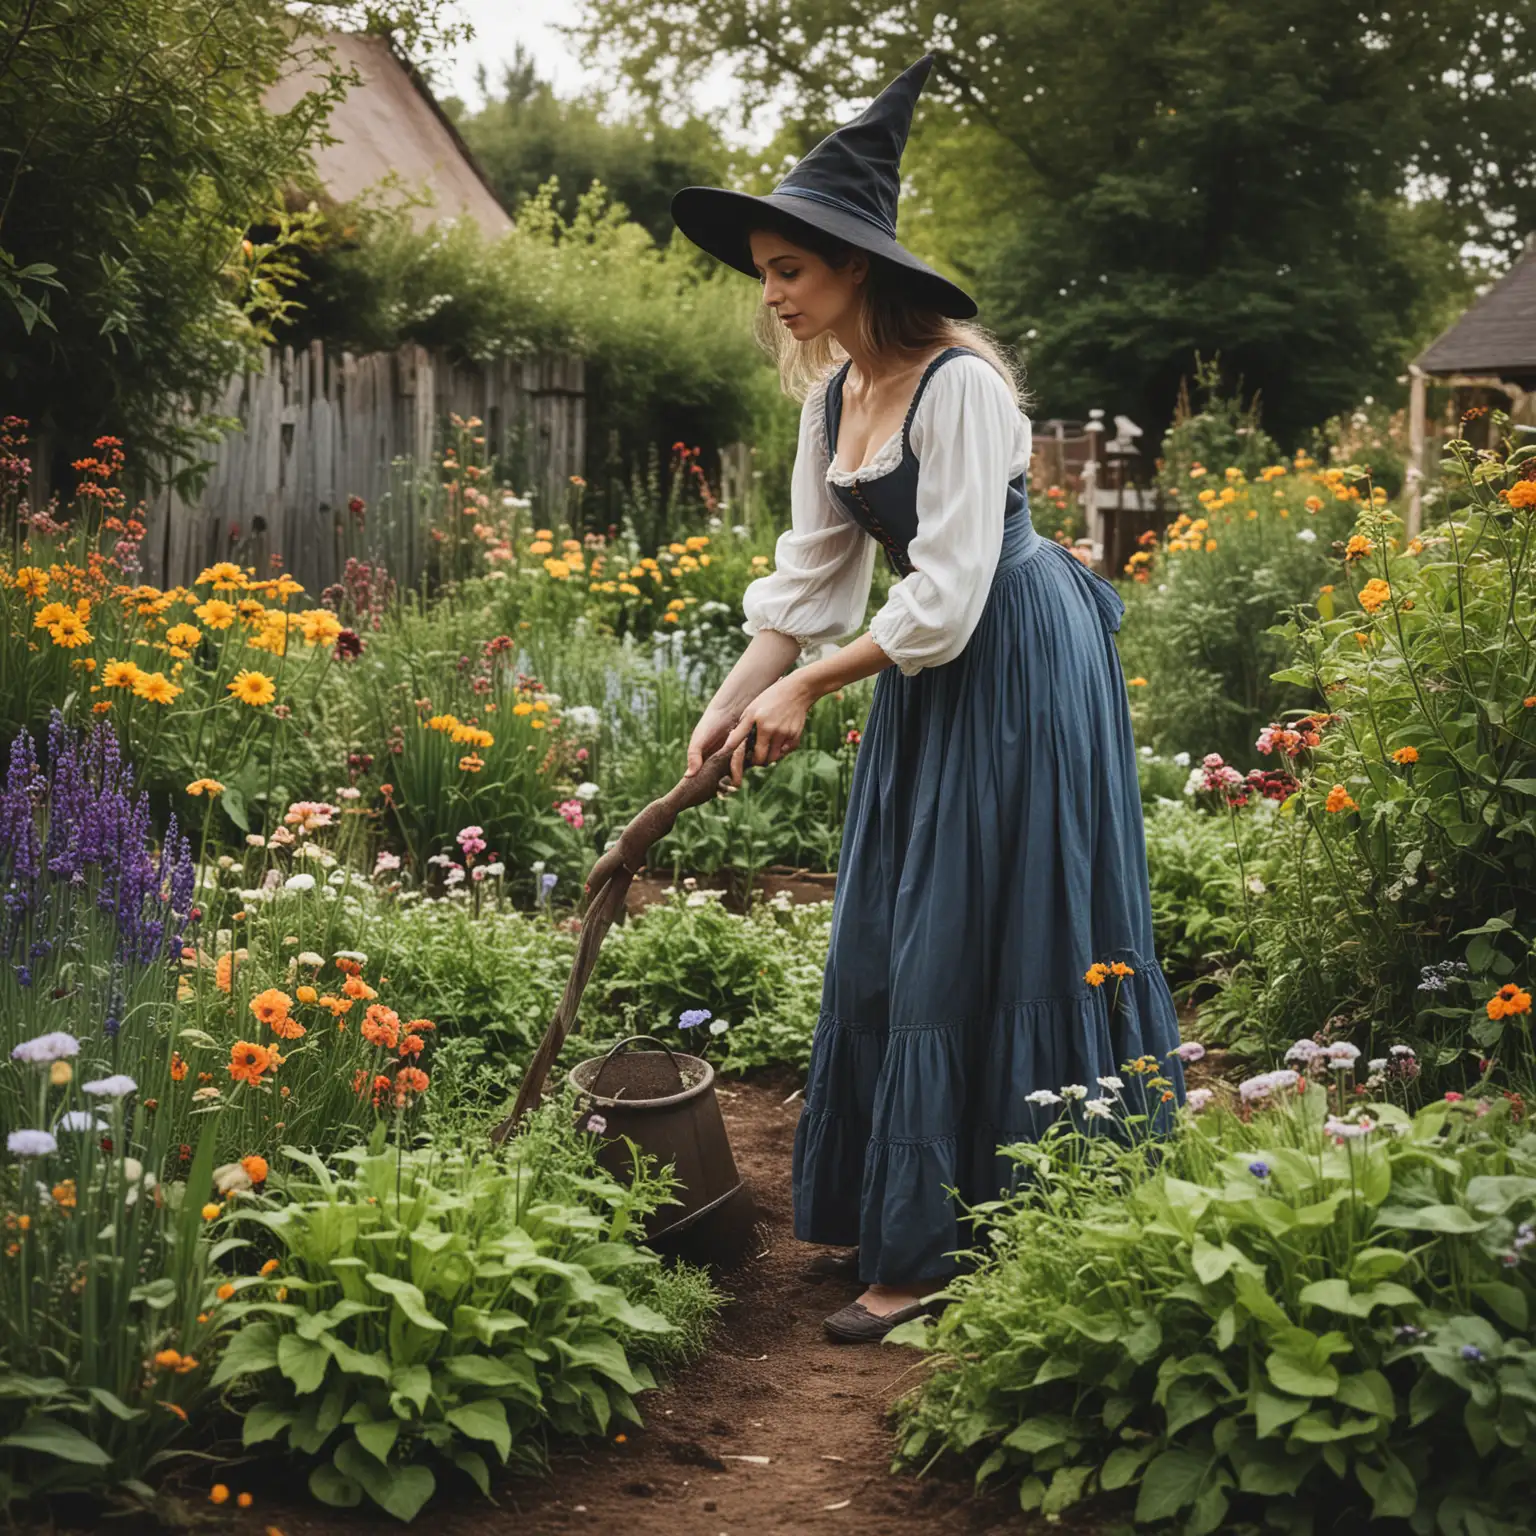 Summer Witch Tending Garden Magical Gardening Scene with Witch in a Floral Dress